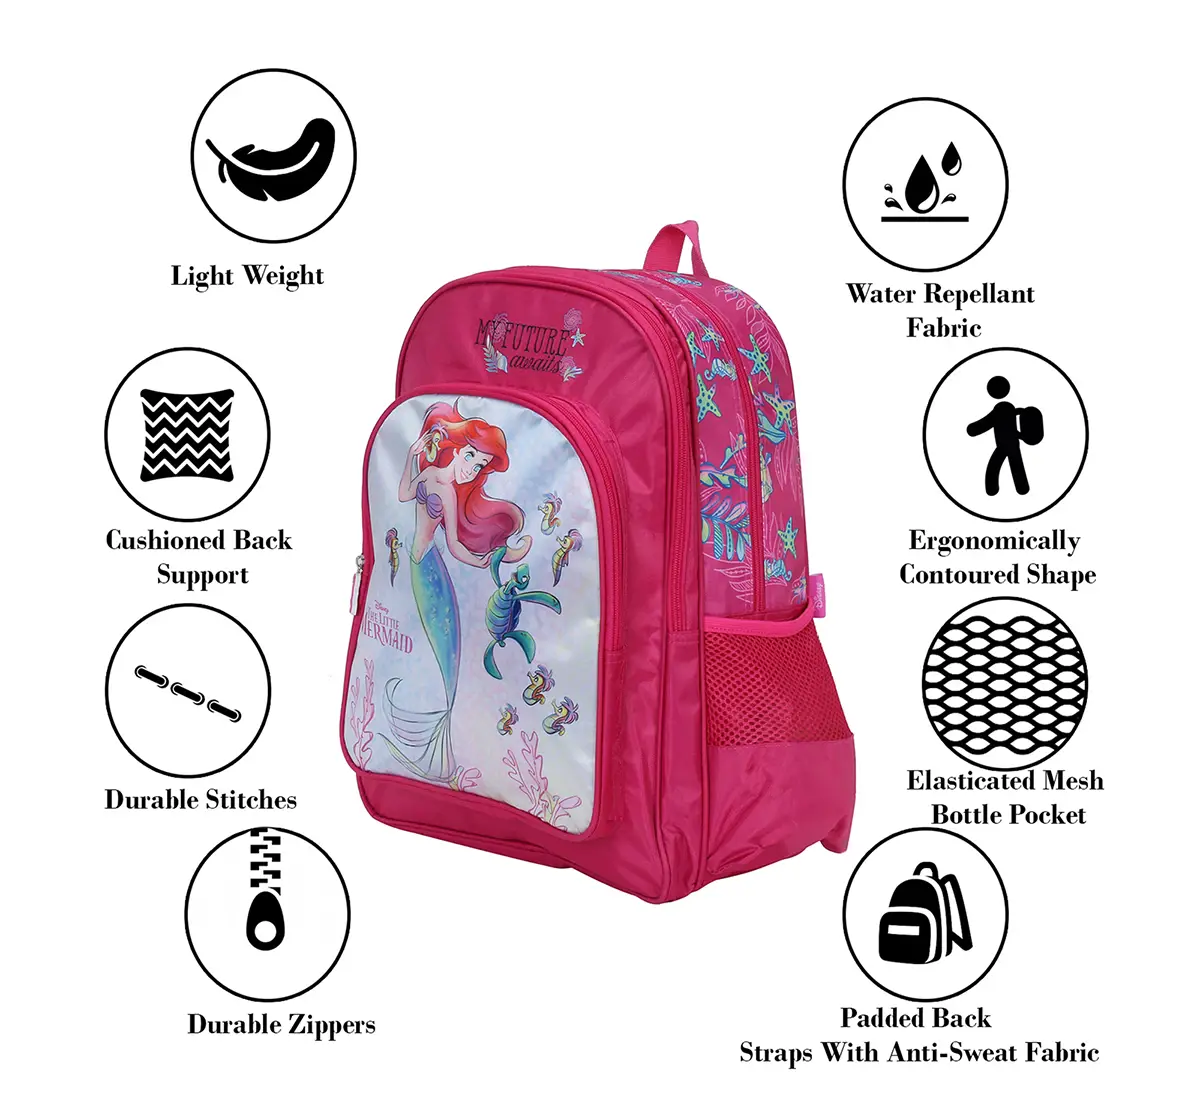 Disney Princess Sea Life 14" Backpack Bags for age 3Y+ 